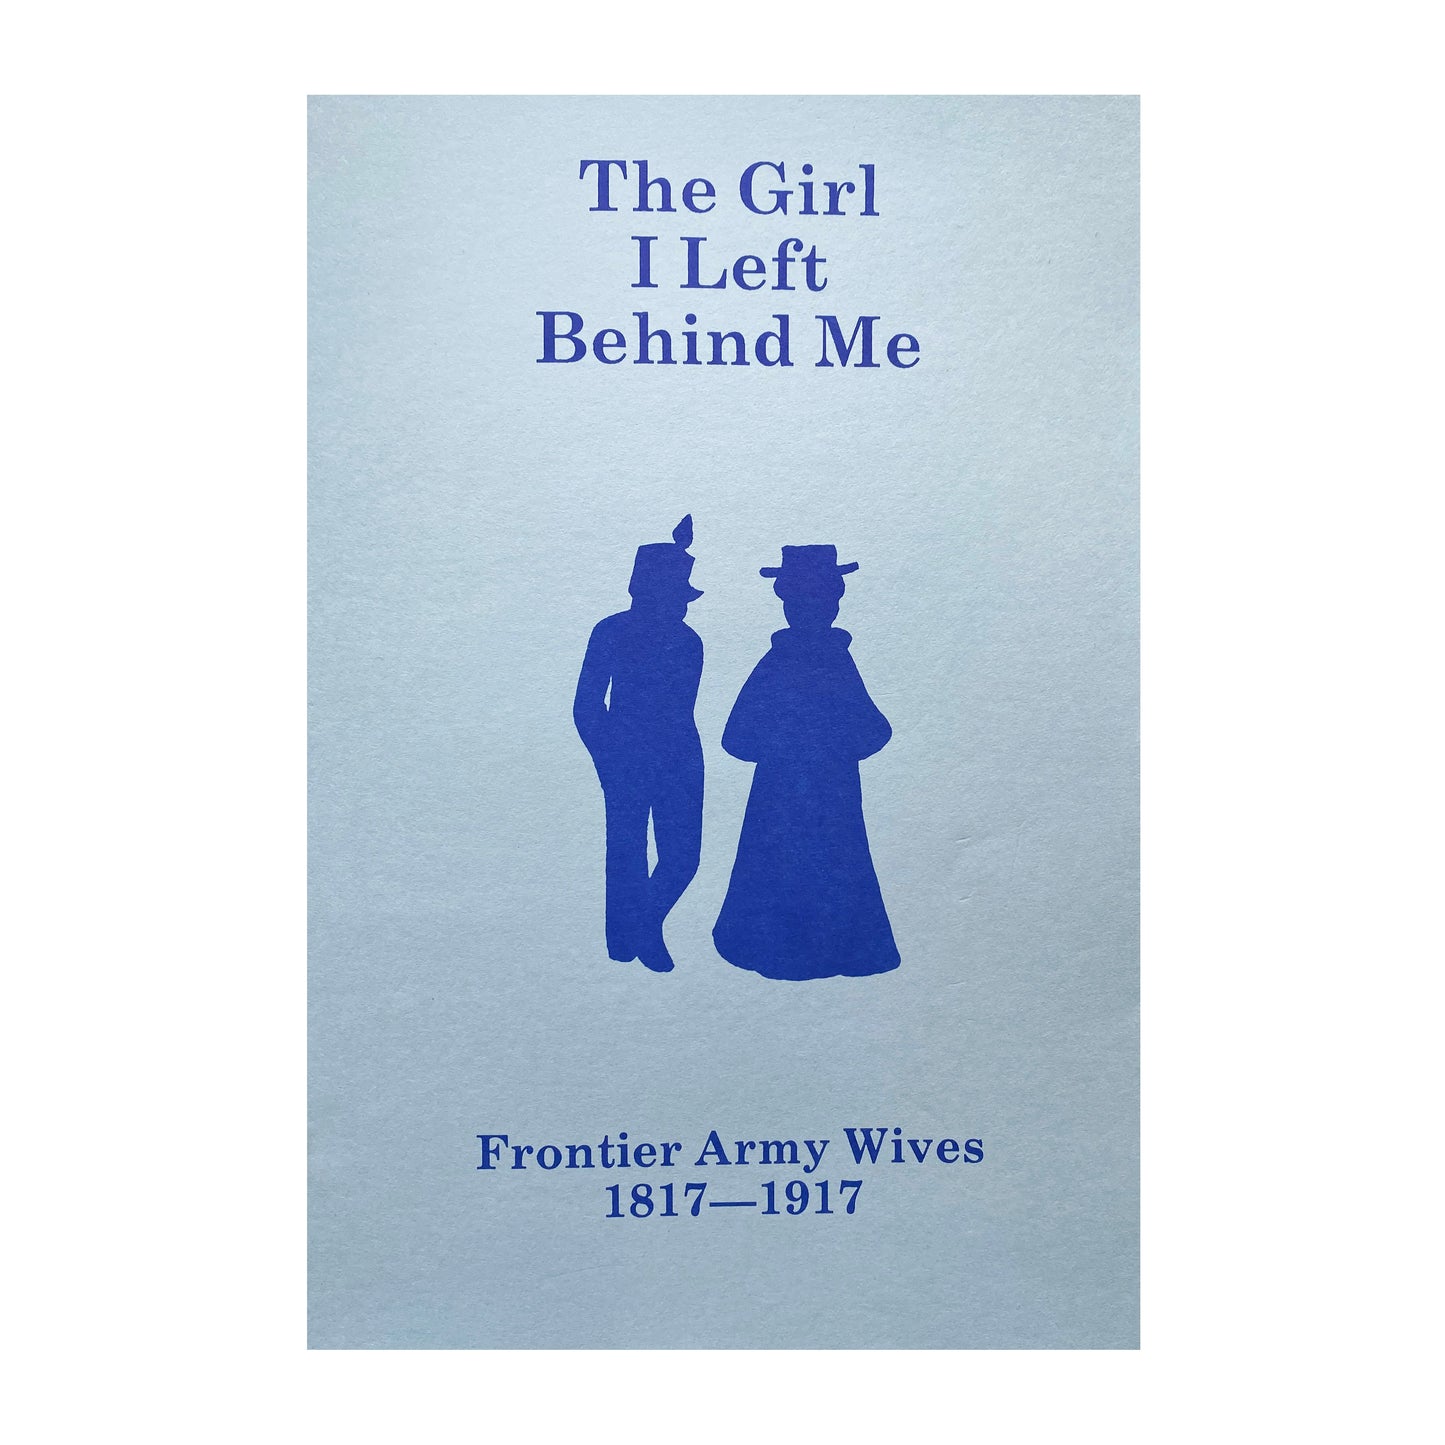 The Girl I Left Behind: Frontier Army Wives 1817-1917